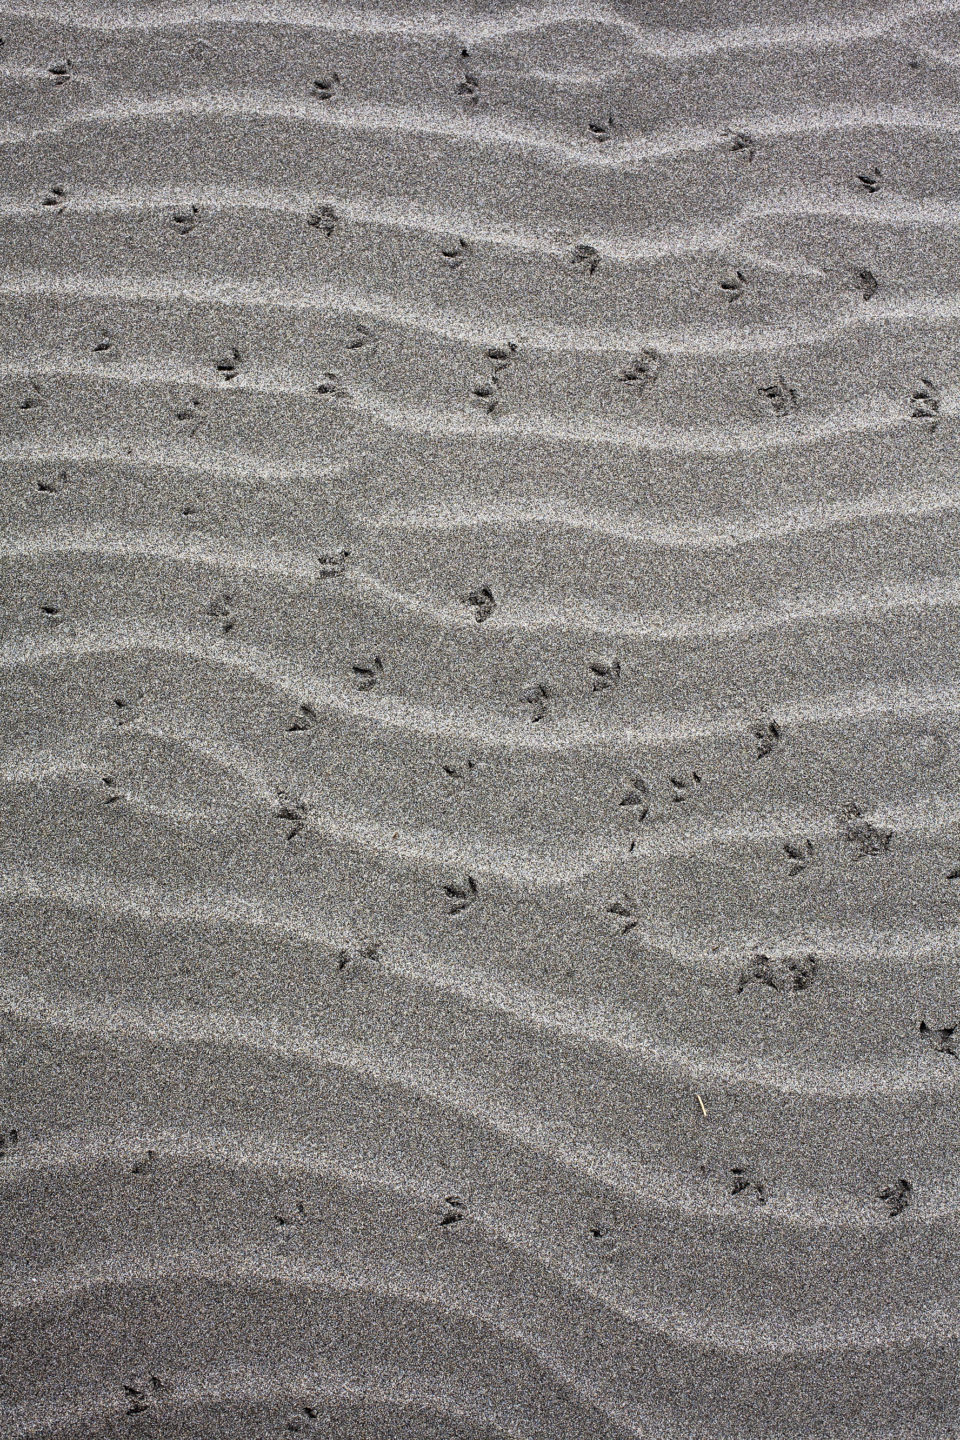 The sands along the Weather Beach Trail, part of the Leadbetter Point Loop, are often riddled with the tiny footprints of snowy plovers, a protected species of shorebird that nests in the dunes.